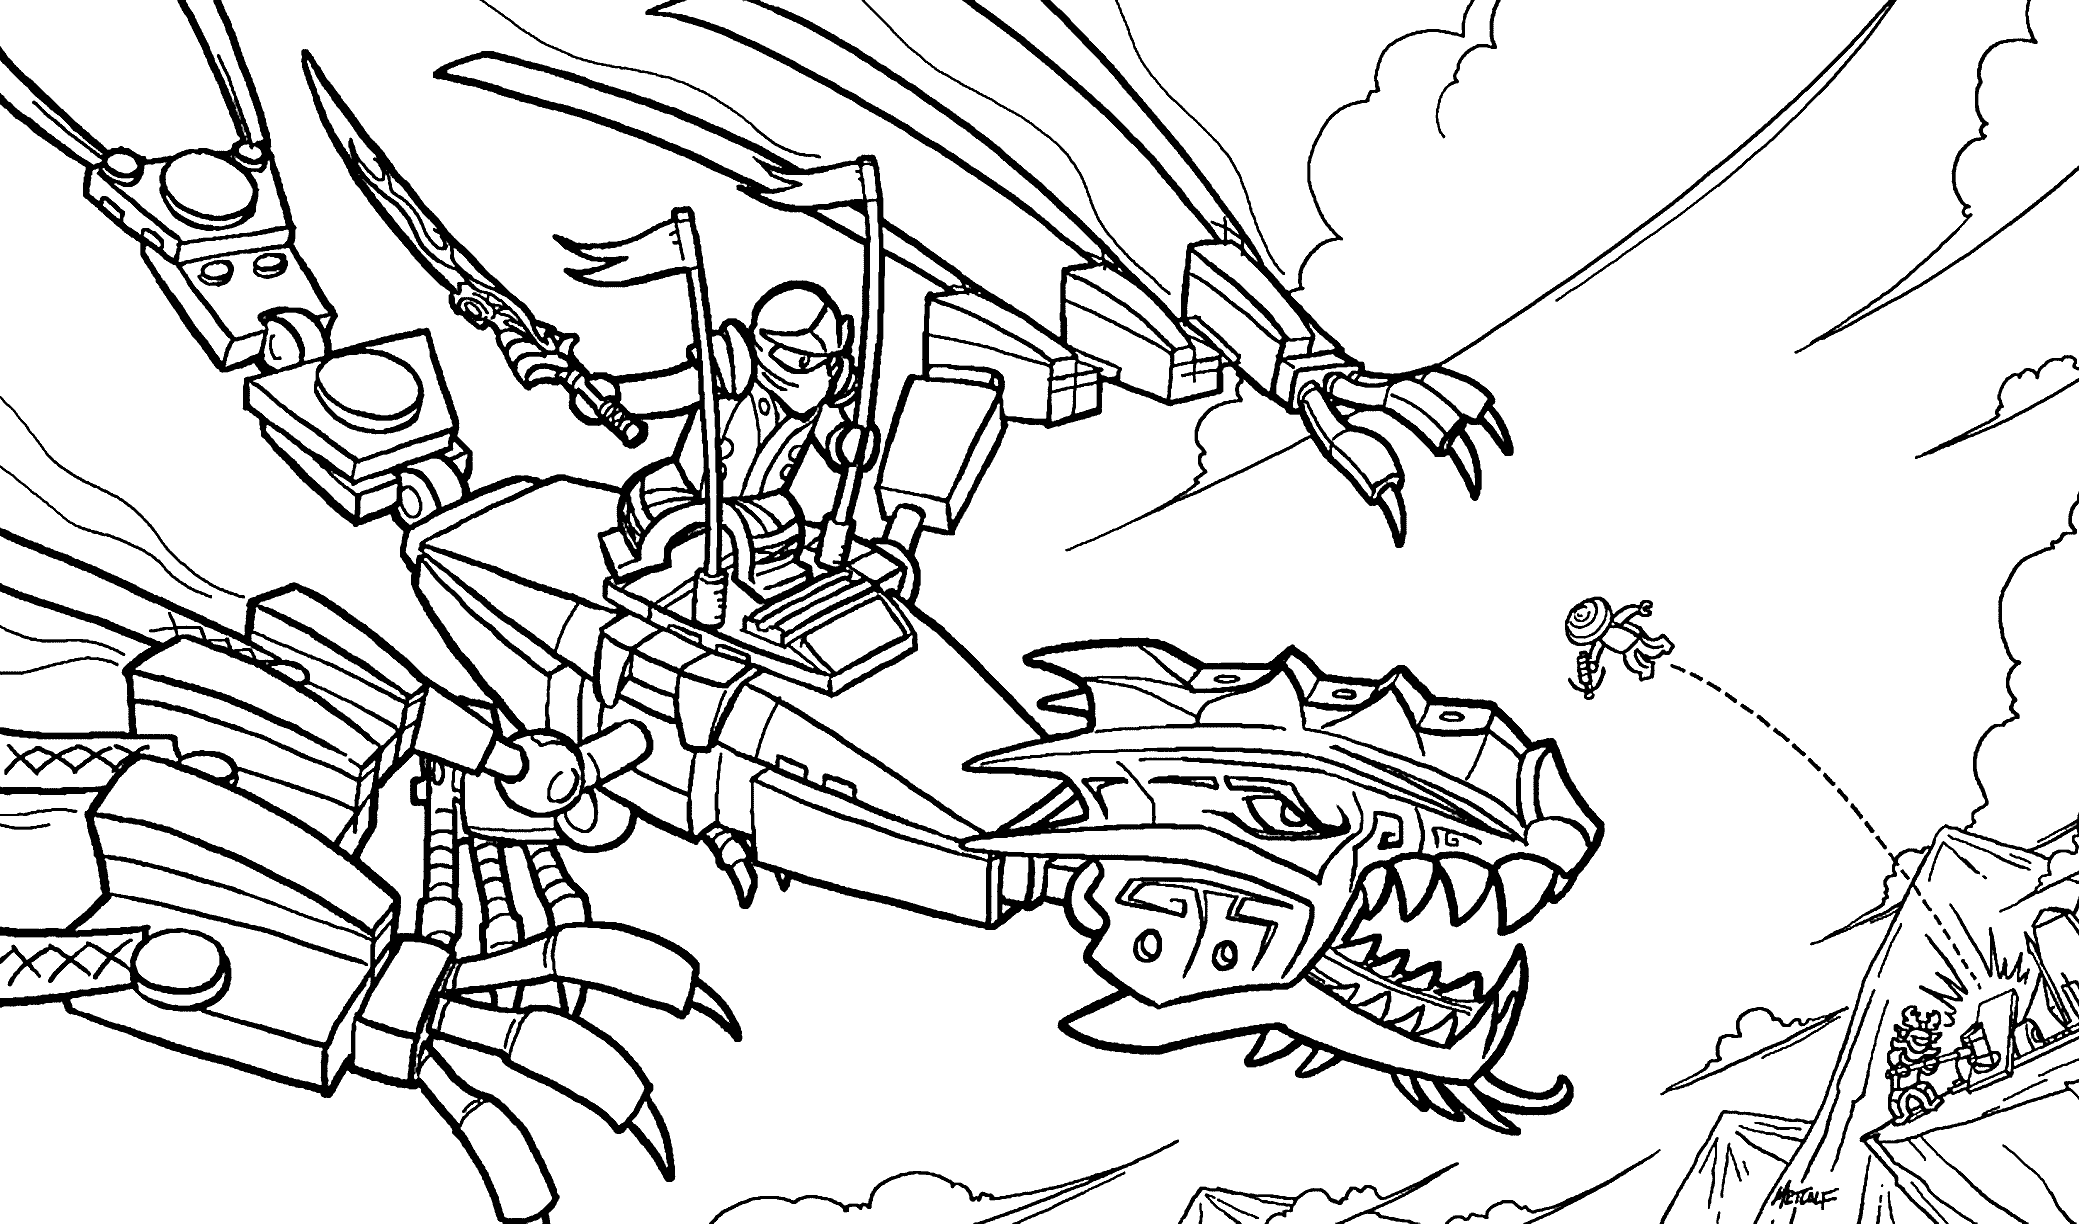 Cool Dragon Coloring Pages PDF Ideas - Coloringfolder.com | Dragon coloring  page, Lego coloring pages, Ninjago coloring pages